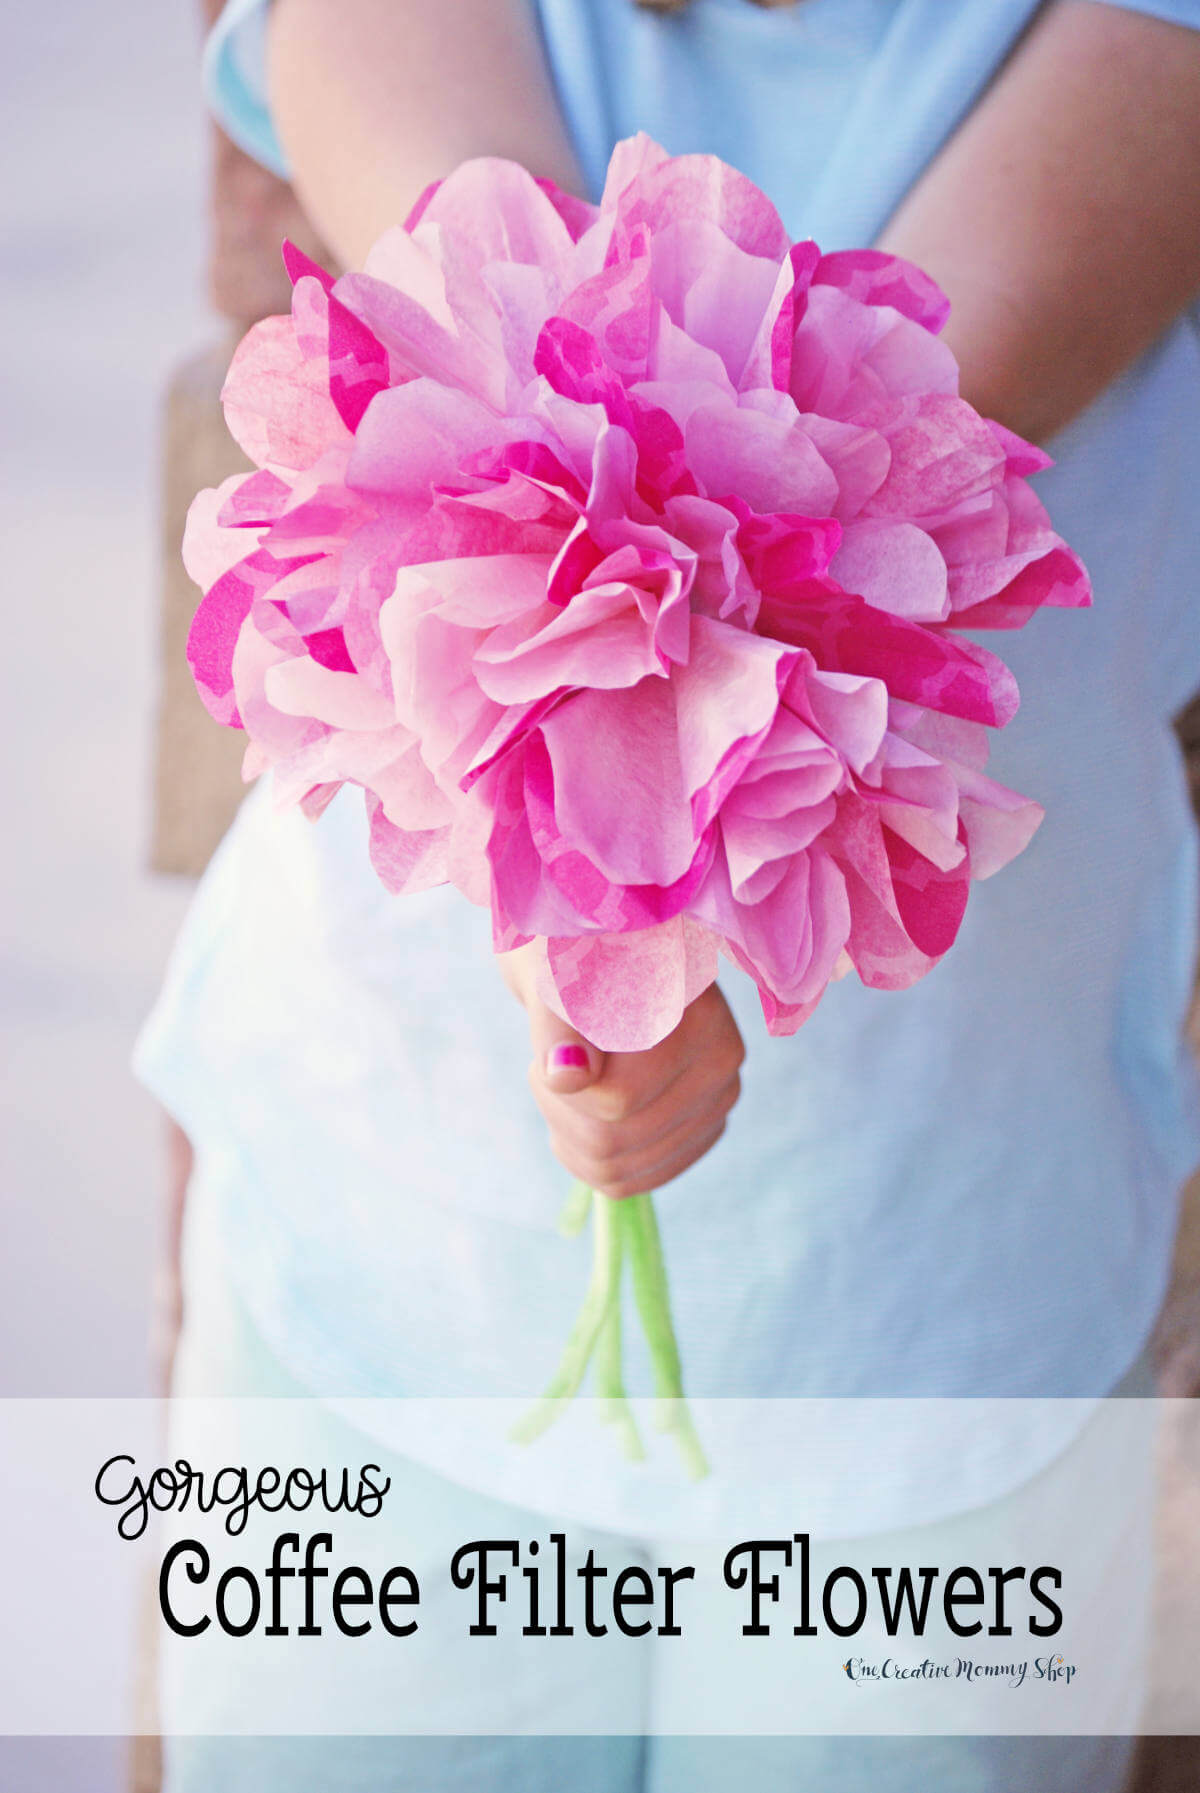 Closeup of the hands of a child holding out a bouquet of pink coffee filter flowers with green chenille stems. Text: Gorgeous Coffee Filter Flowers